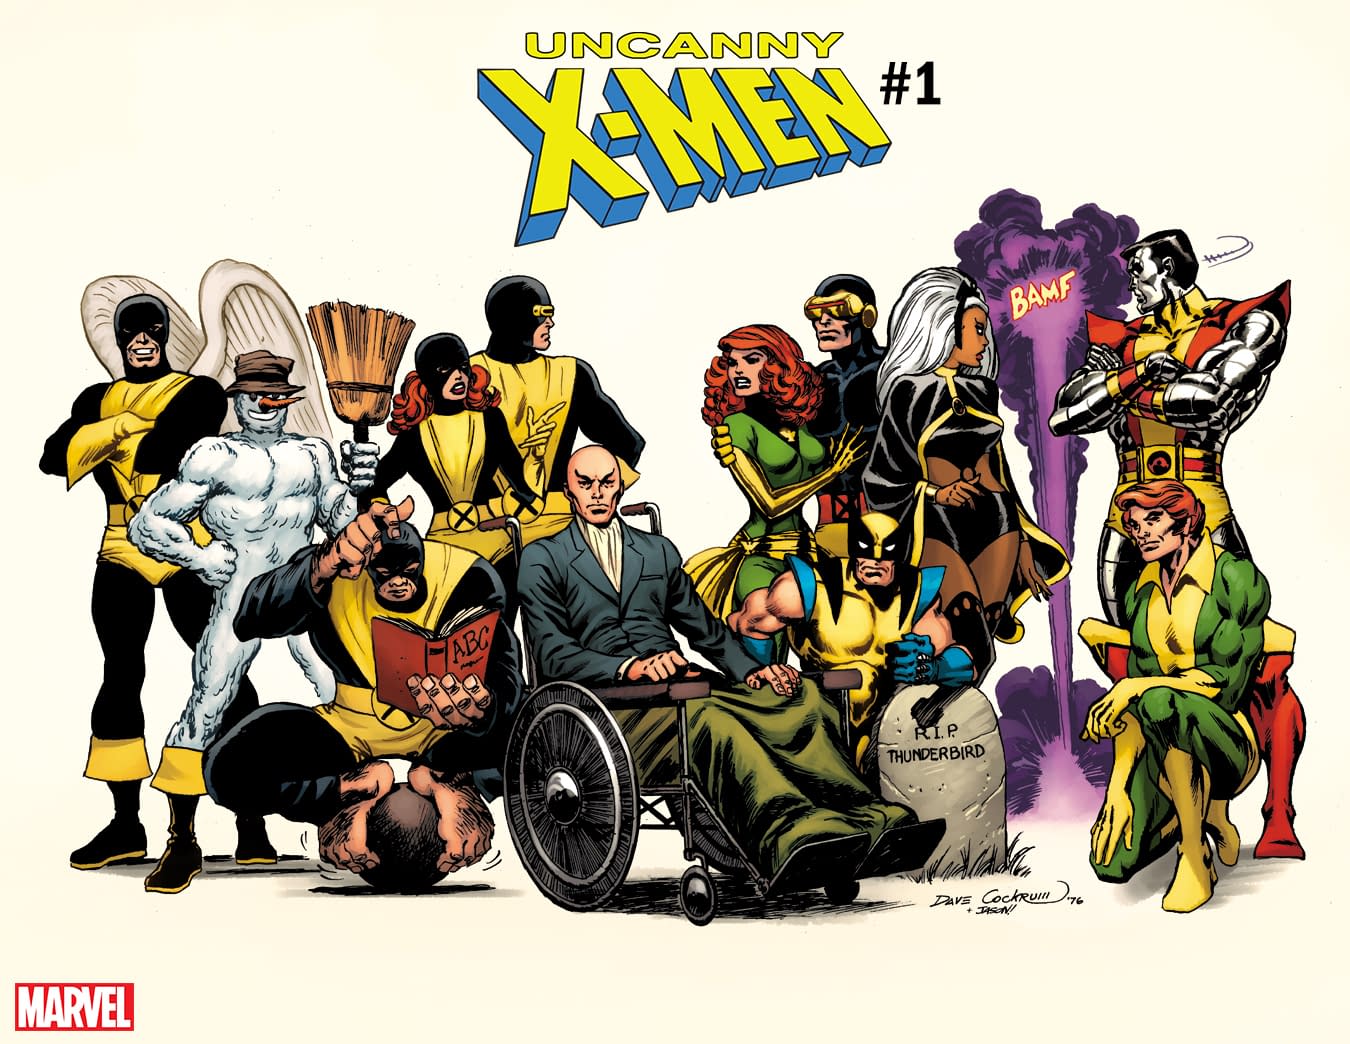 Marvel Recycles 40-Year-Old Dave Cockrum Art for Uncanny X-Men #1 Variant